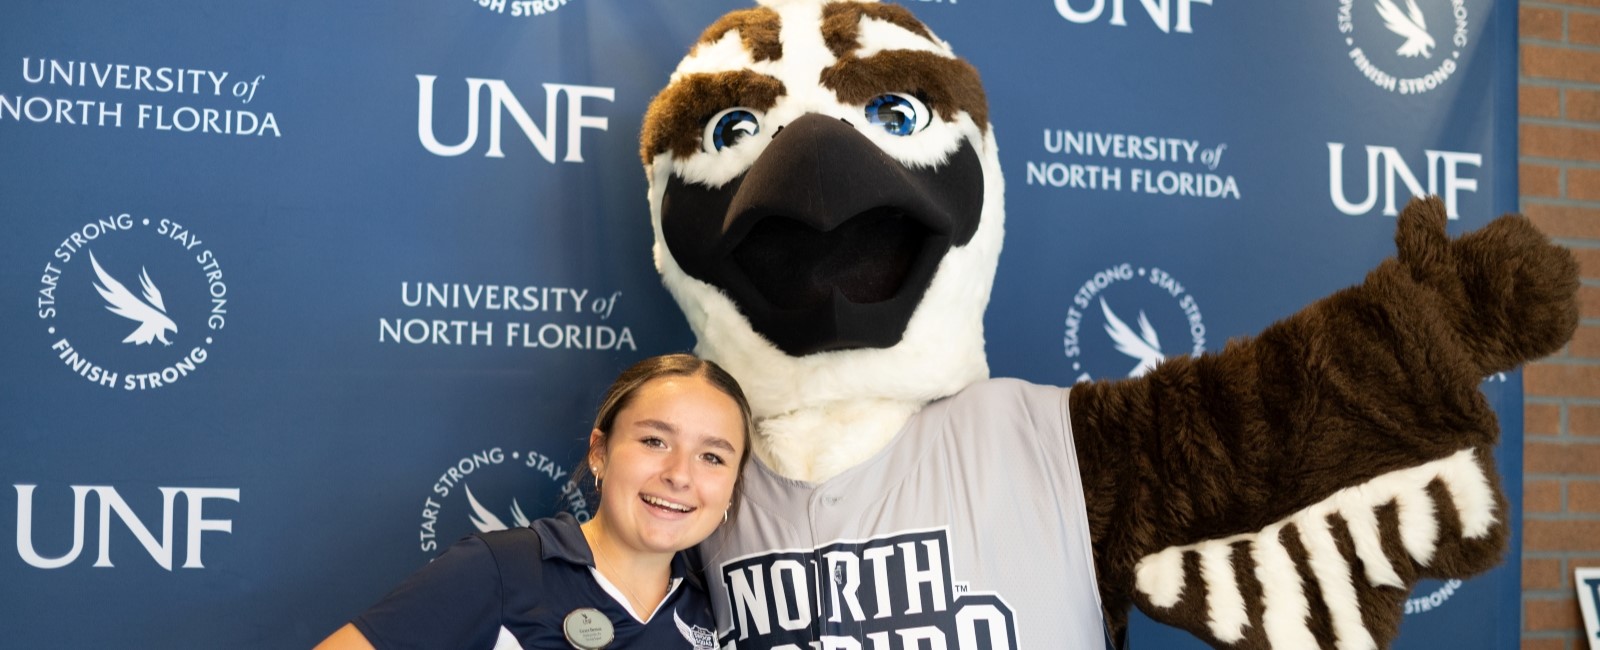 A UNF student tour guide and the UNF mascot posing for a photo.